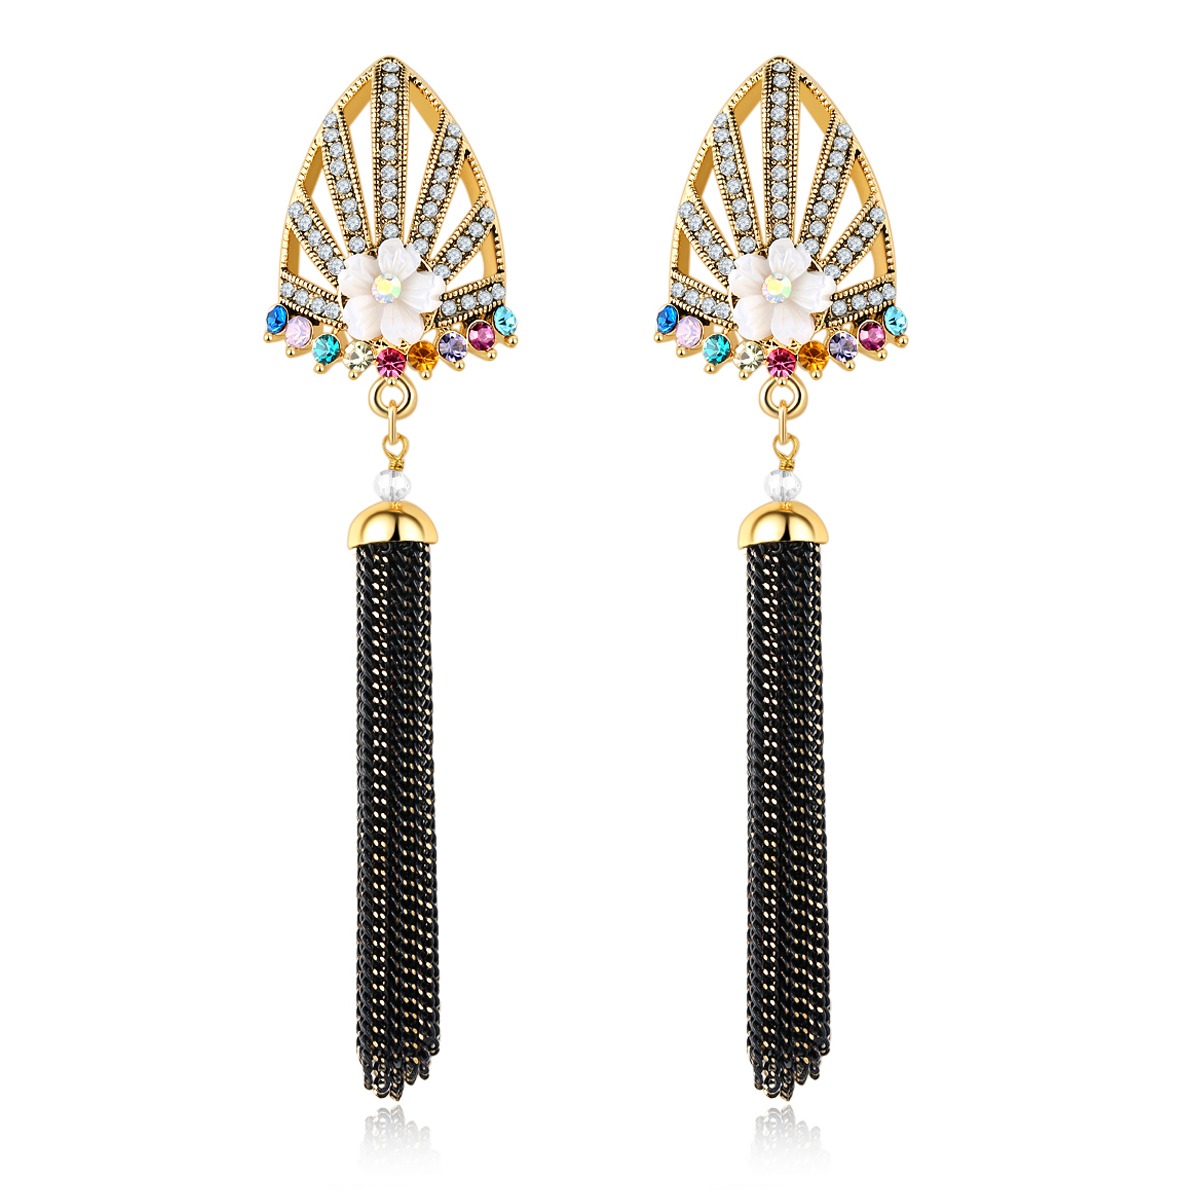 Buy Bold N Elegant Silk Thread Long Tassel Earrings Bohemia Vintage Ribbon  Dangle Earrings for Girls (Blue) Online at Lowest Price Ever in India |  Check Reviews & Ratings - Shop The World